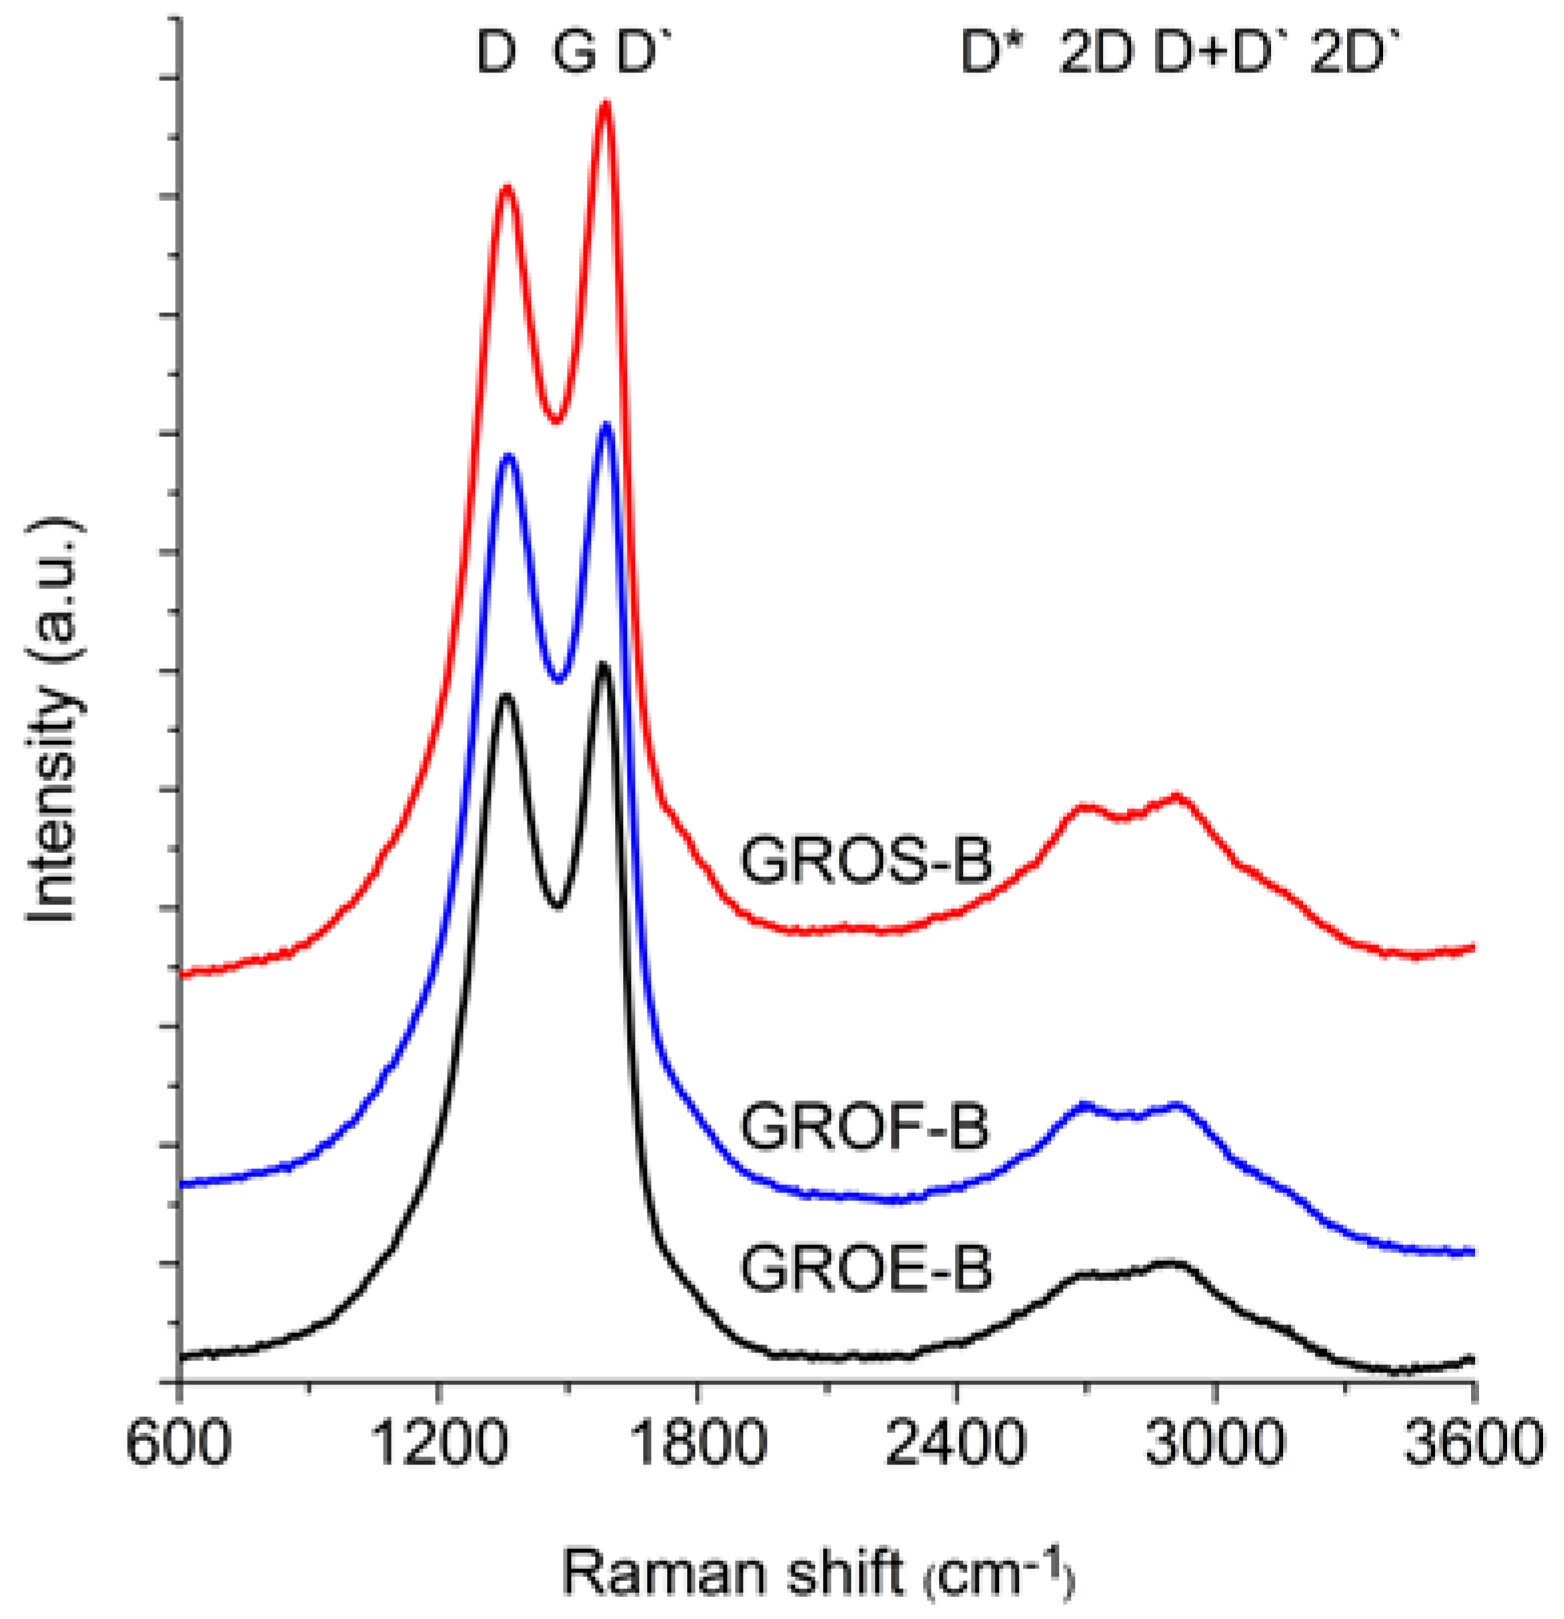 Materials | Free Full-Text | Characterization of Graphite Oxide and Reduced Graphene  Oxide Obtained from Different Graphite Precursors and Oxidized by Different  Methods Using Raman Spectroscopy